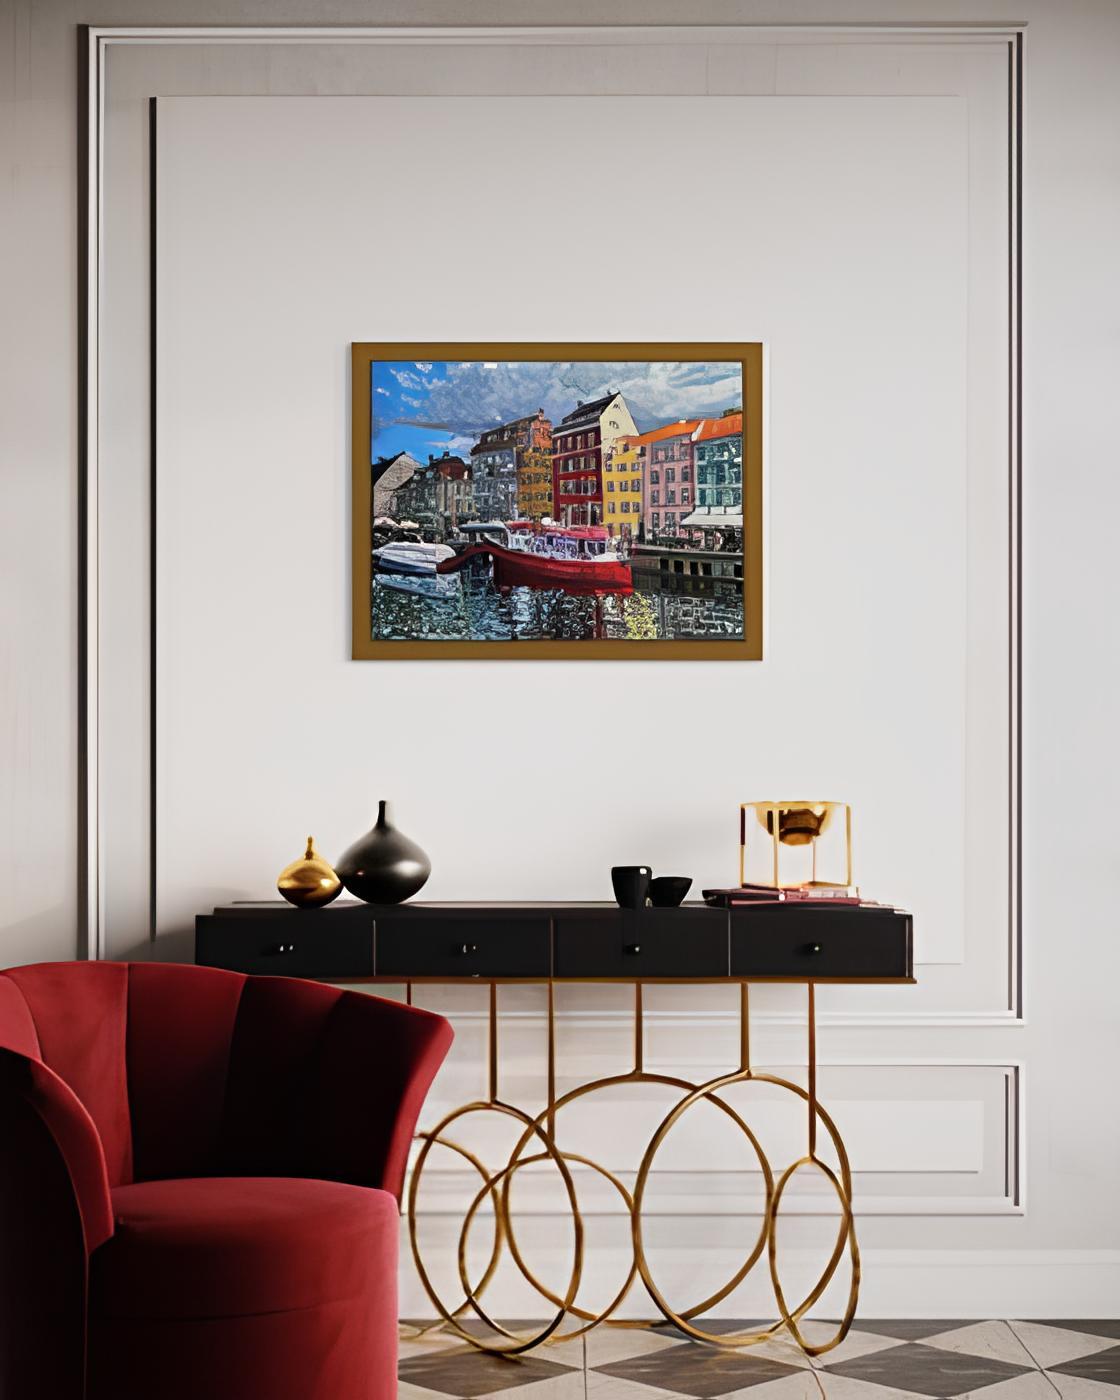 In this oil painting, I've poured my soul into capturing the vibrant essence of a bustling harbor scene. The brushwork dances with the rhythm of life, reflecting impressionistic touches that invite the viewer into a moment of both joy and serenity.